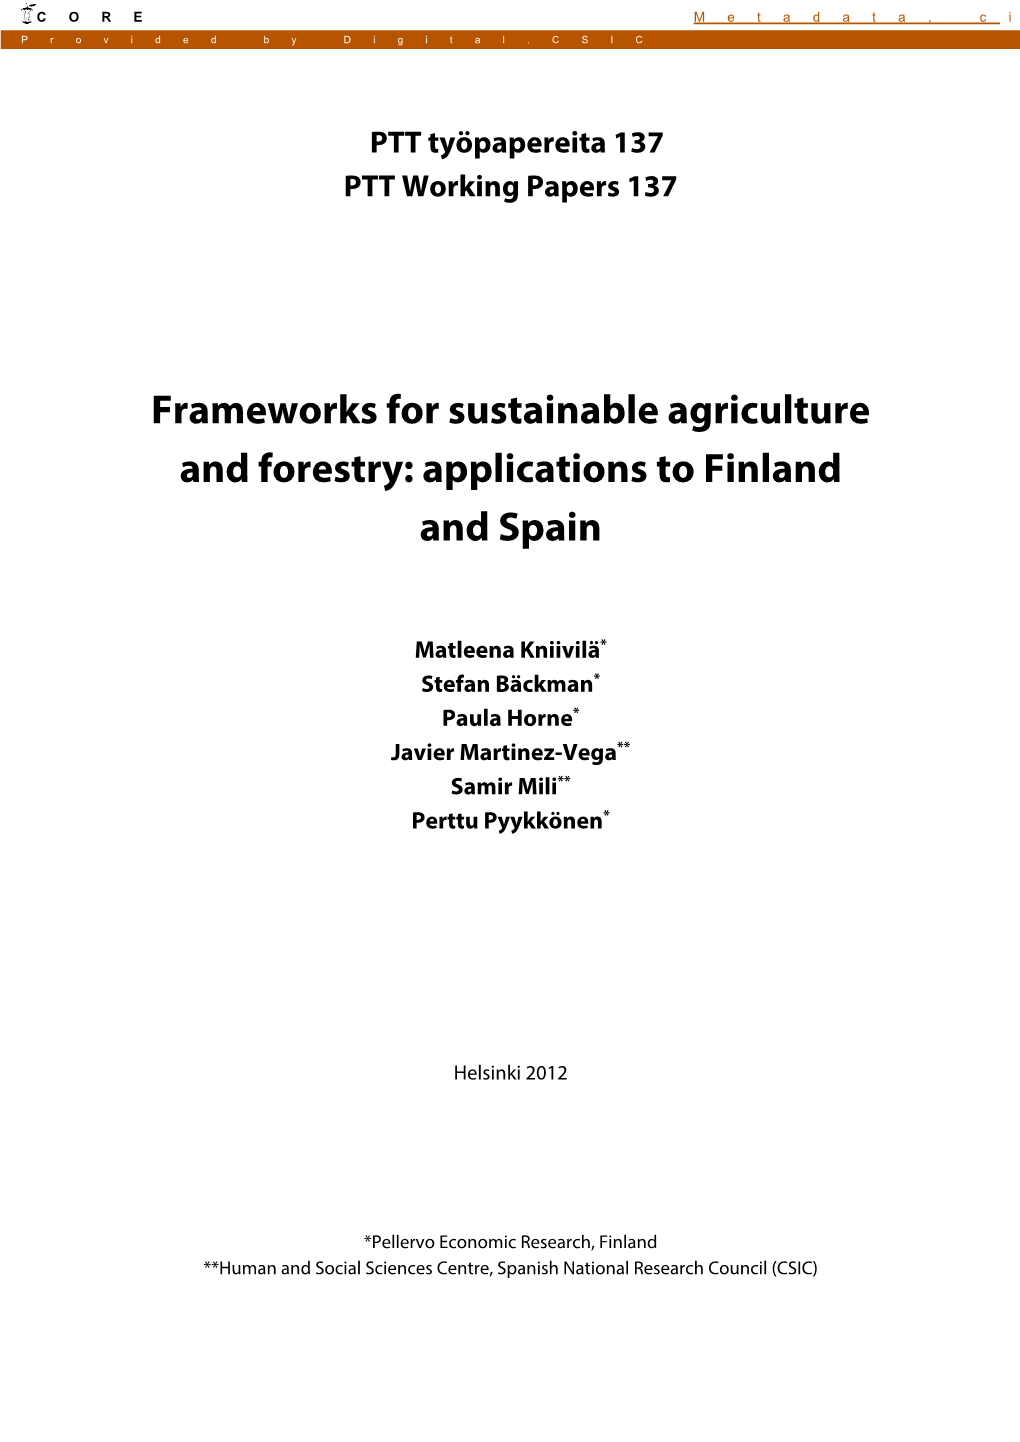 Frameworks for Sustainable Agriculture and Forestry: Applications to Finland and Spain